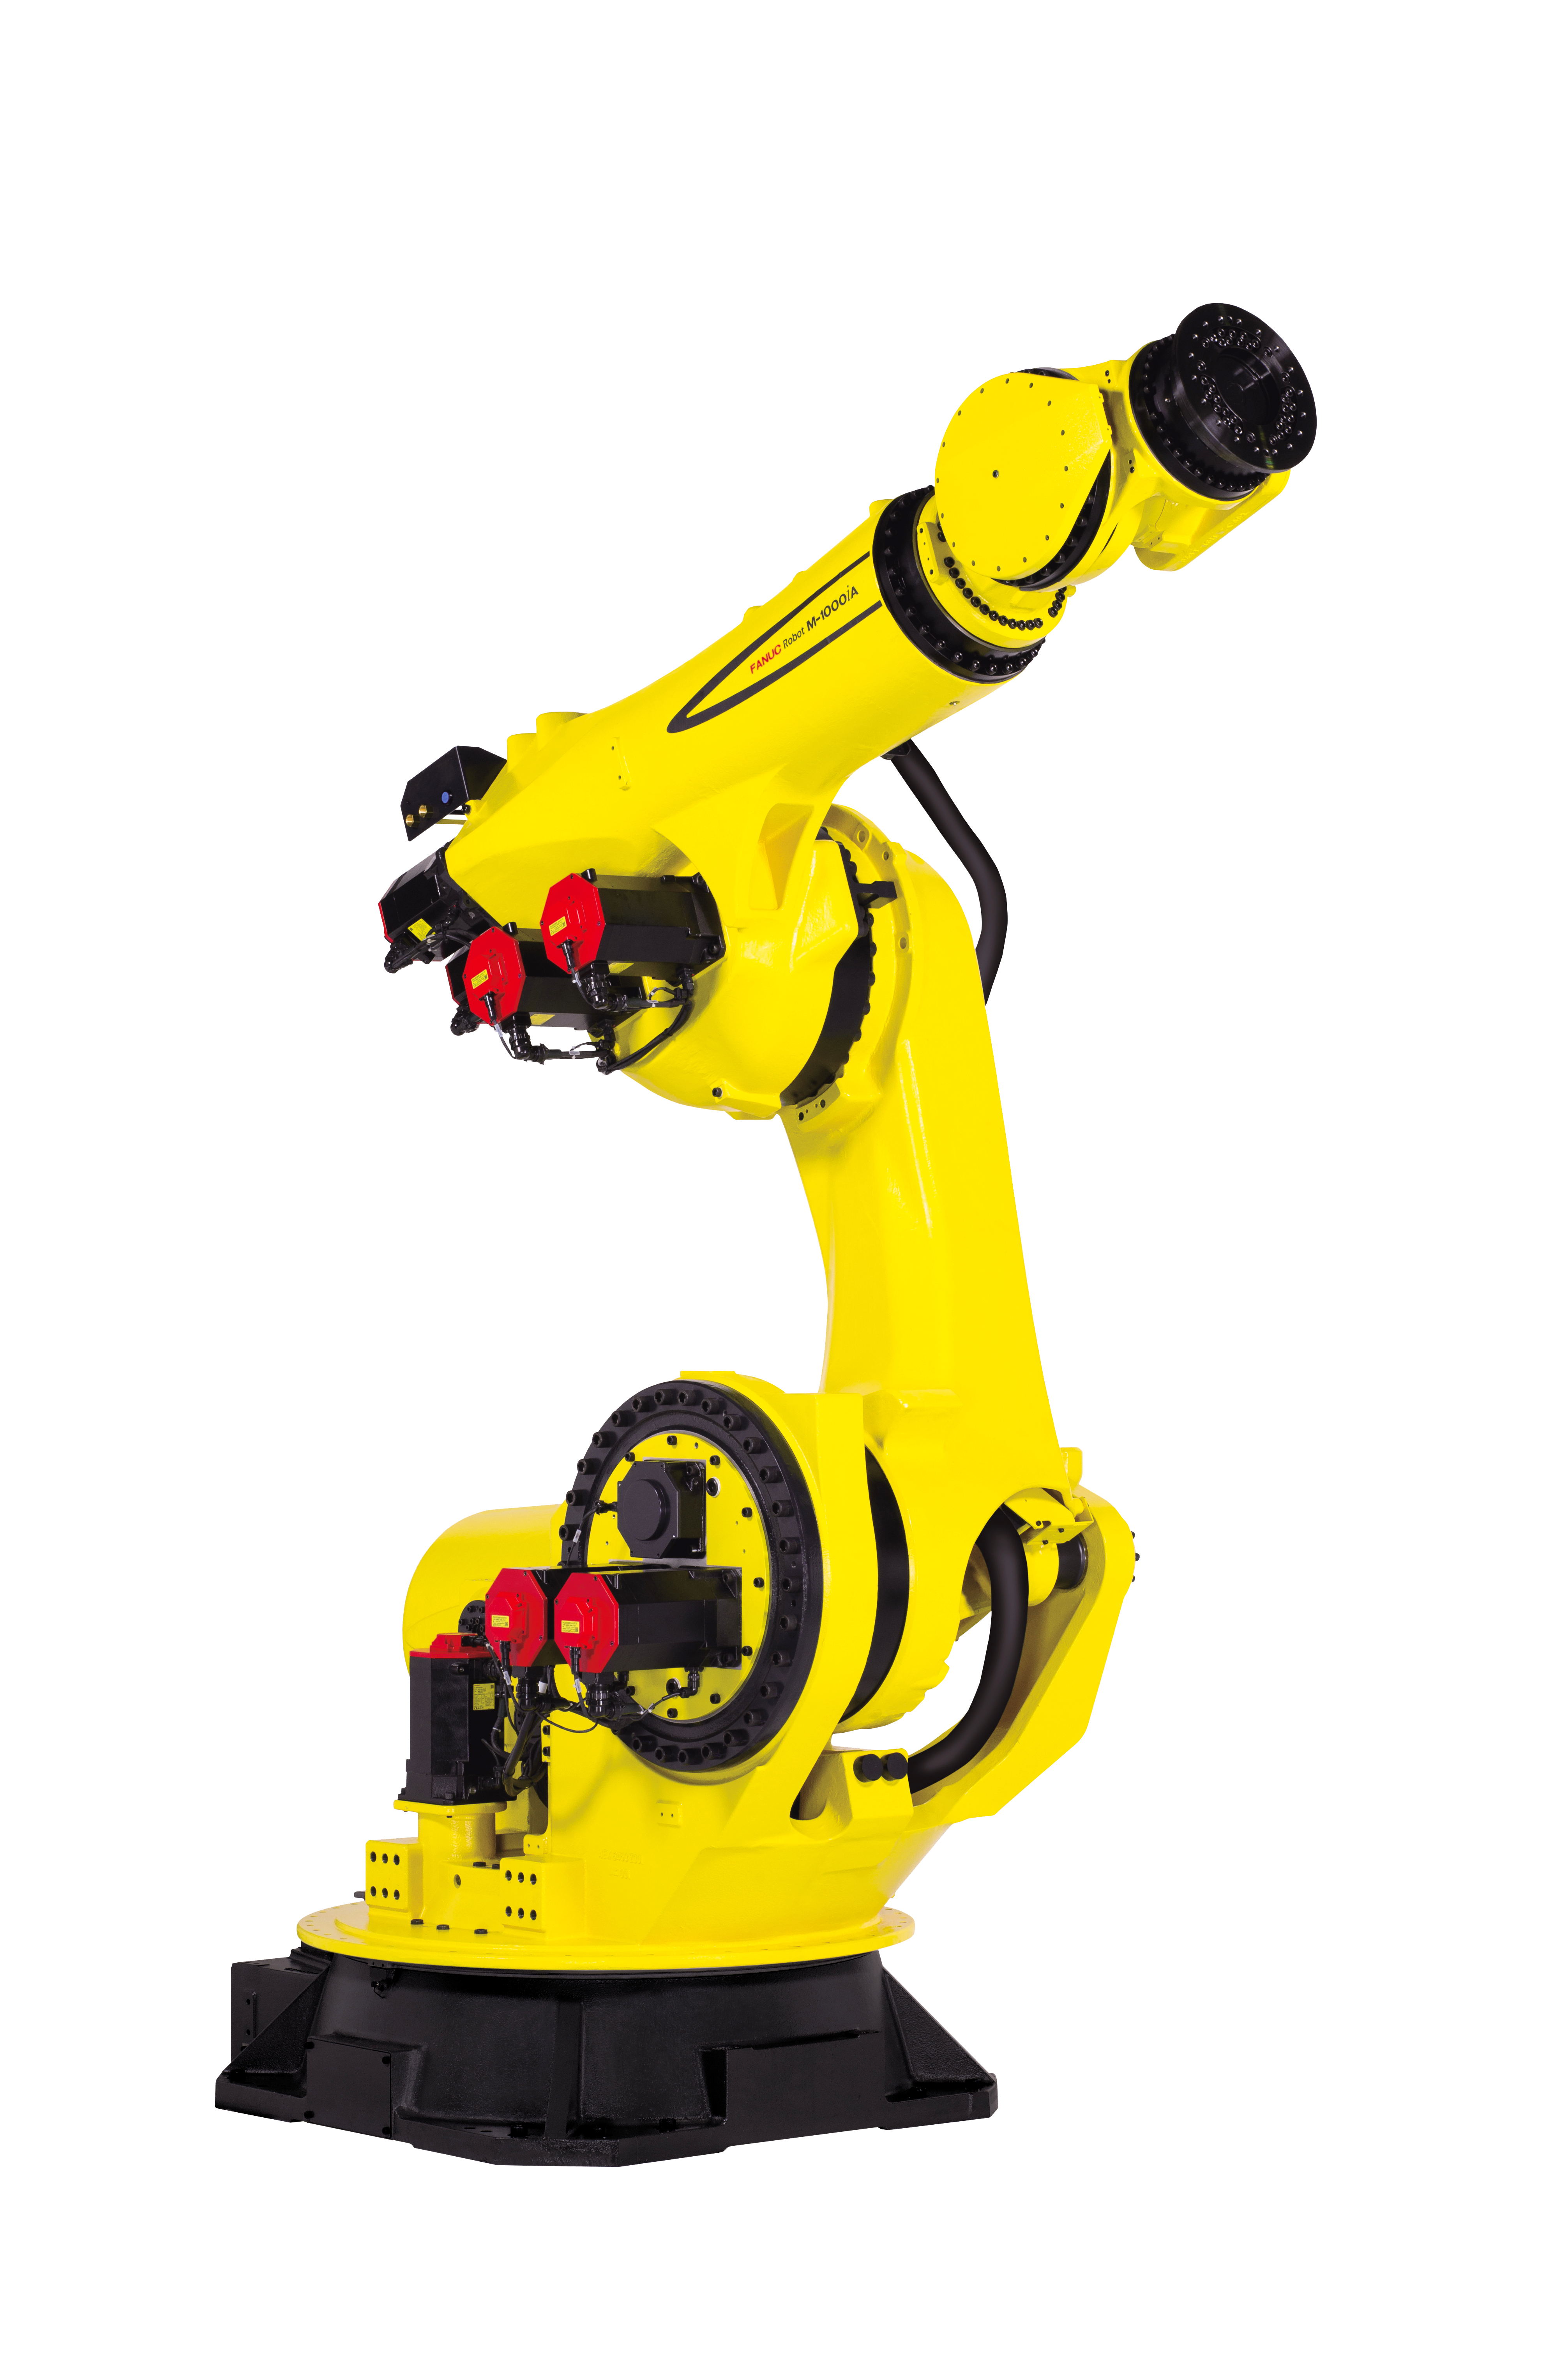 FANUC Introduces New M-1000iA Robot Designed to Handle Heavy Products Business Wire